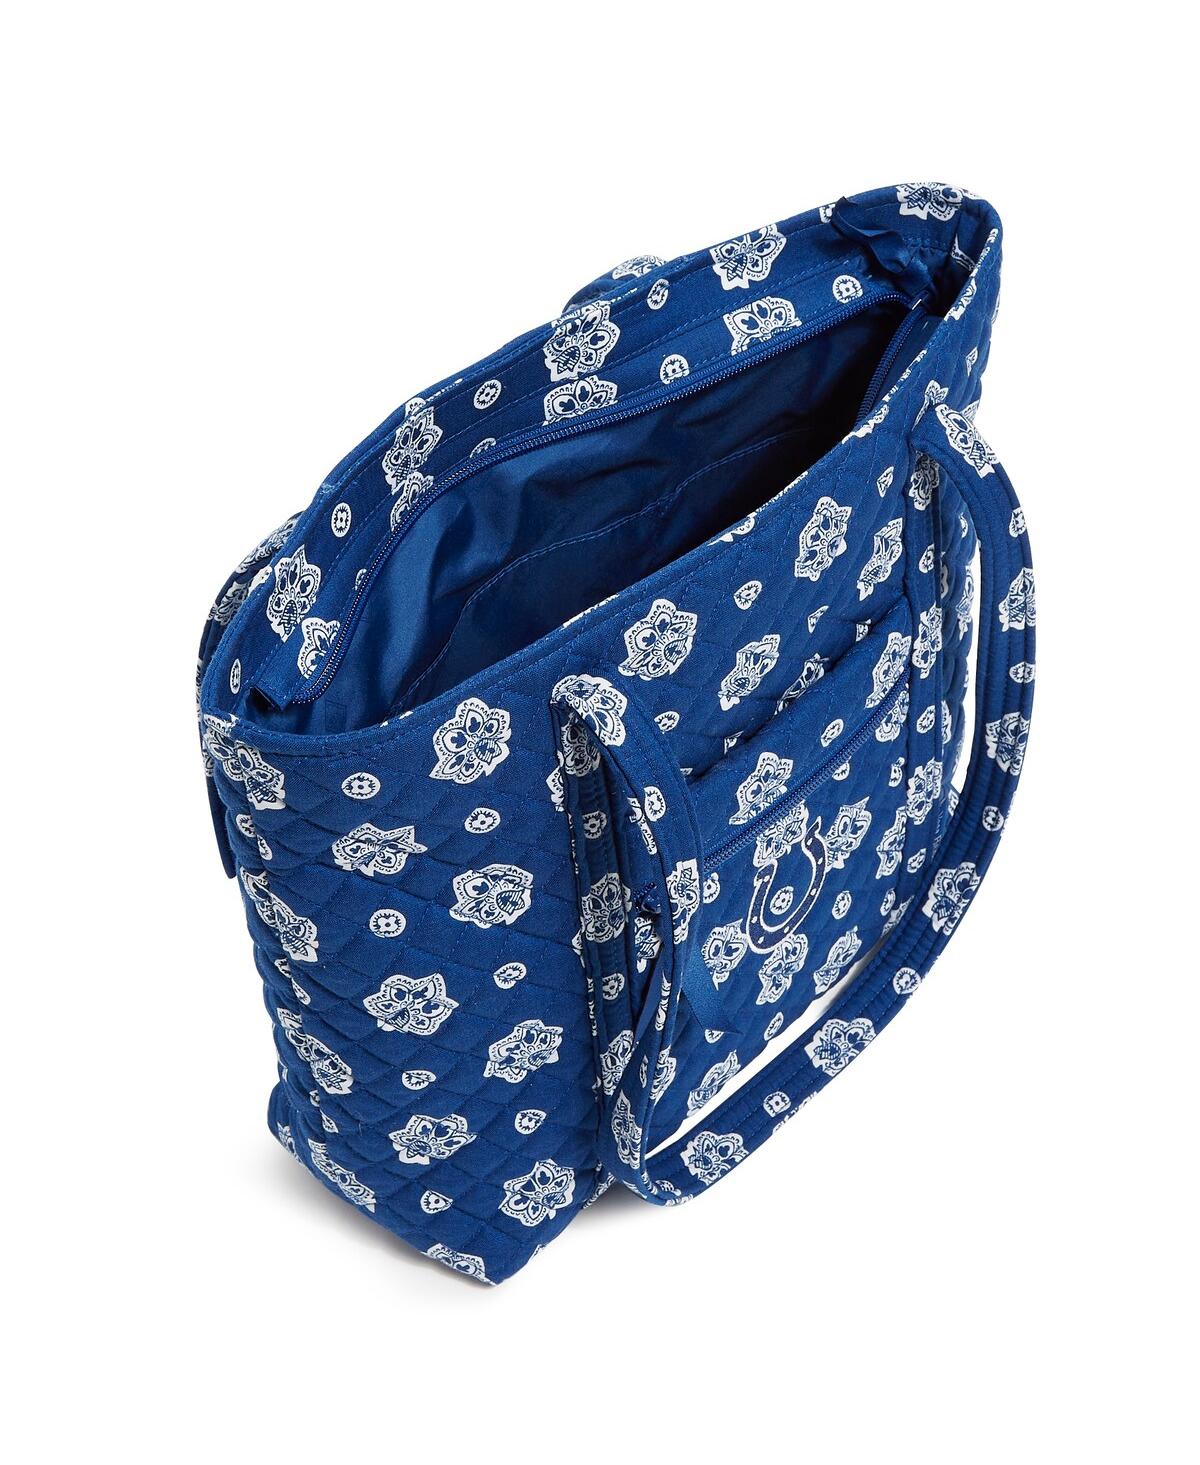 Shop Vera Bradley Women's  Indianapolis Colts Small Tote Bag In Royal